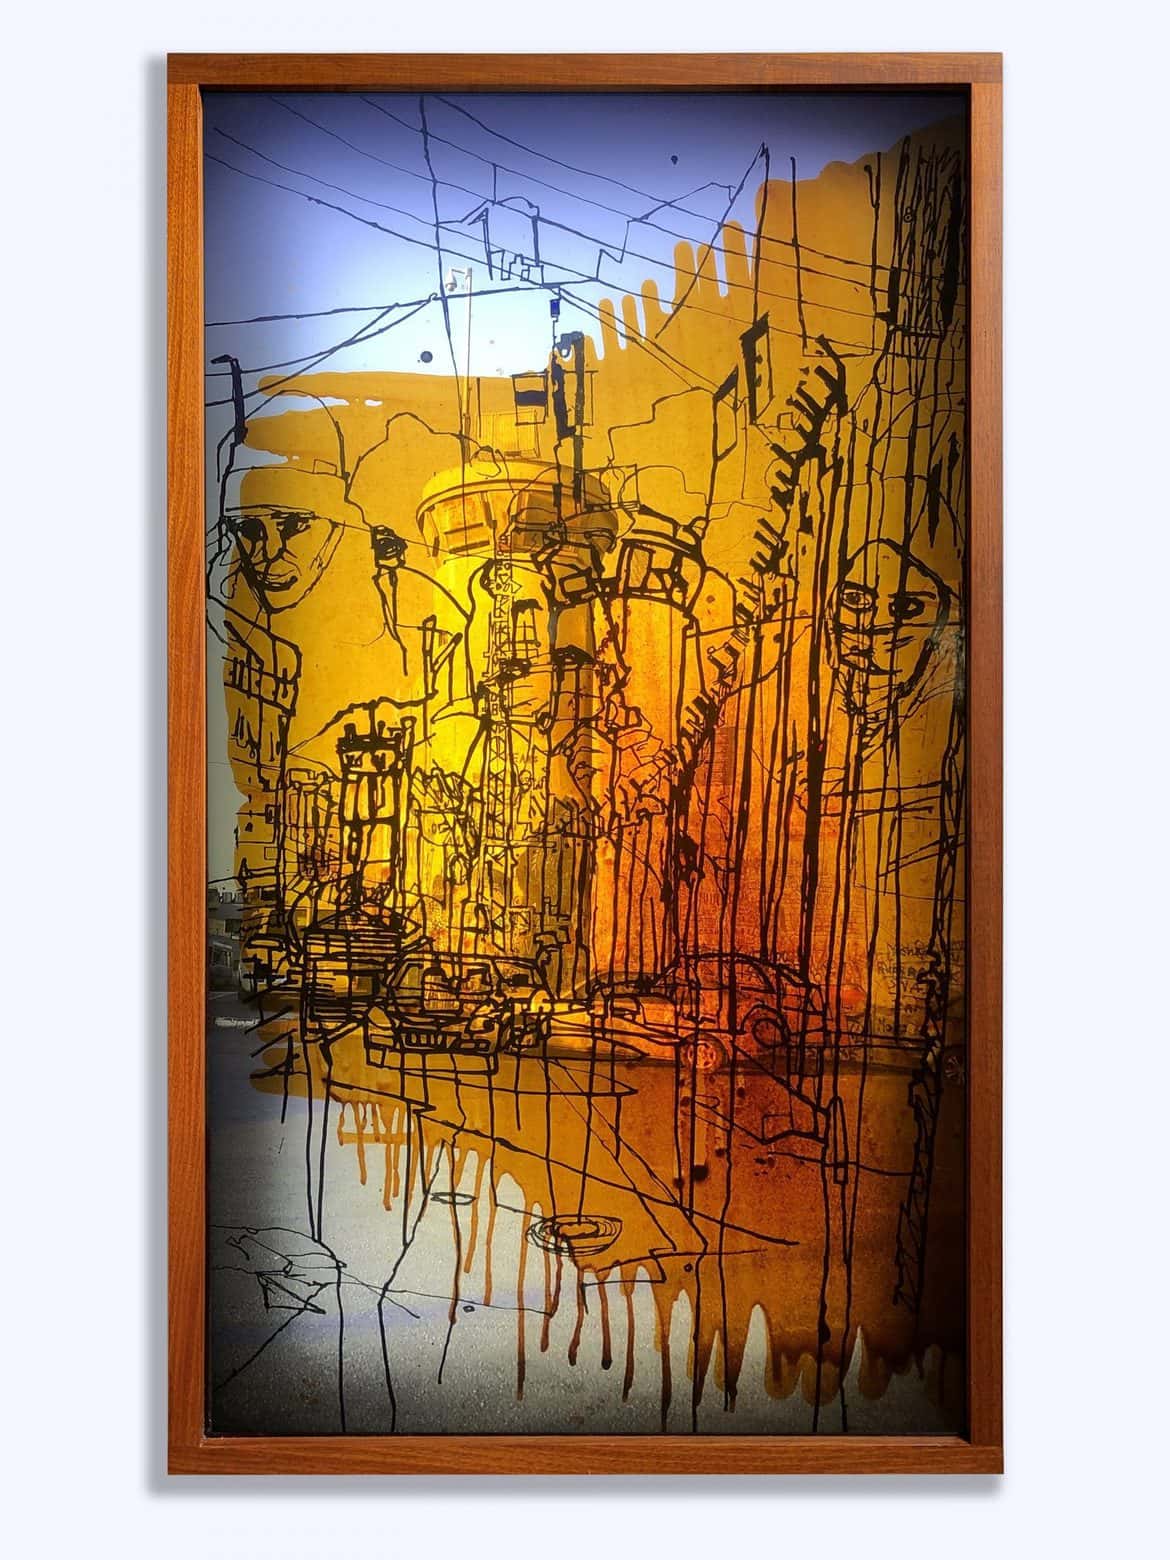 ‘Bethlehem’, 2020, mixed media on translucent film with face-mounted photographic image on acrylic in framed light box,140 x 80 x 11 cm (straight)